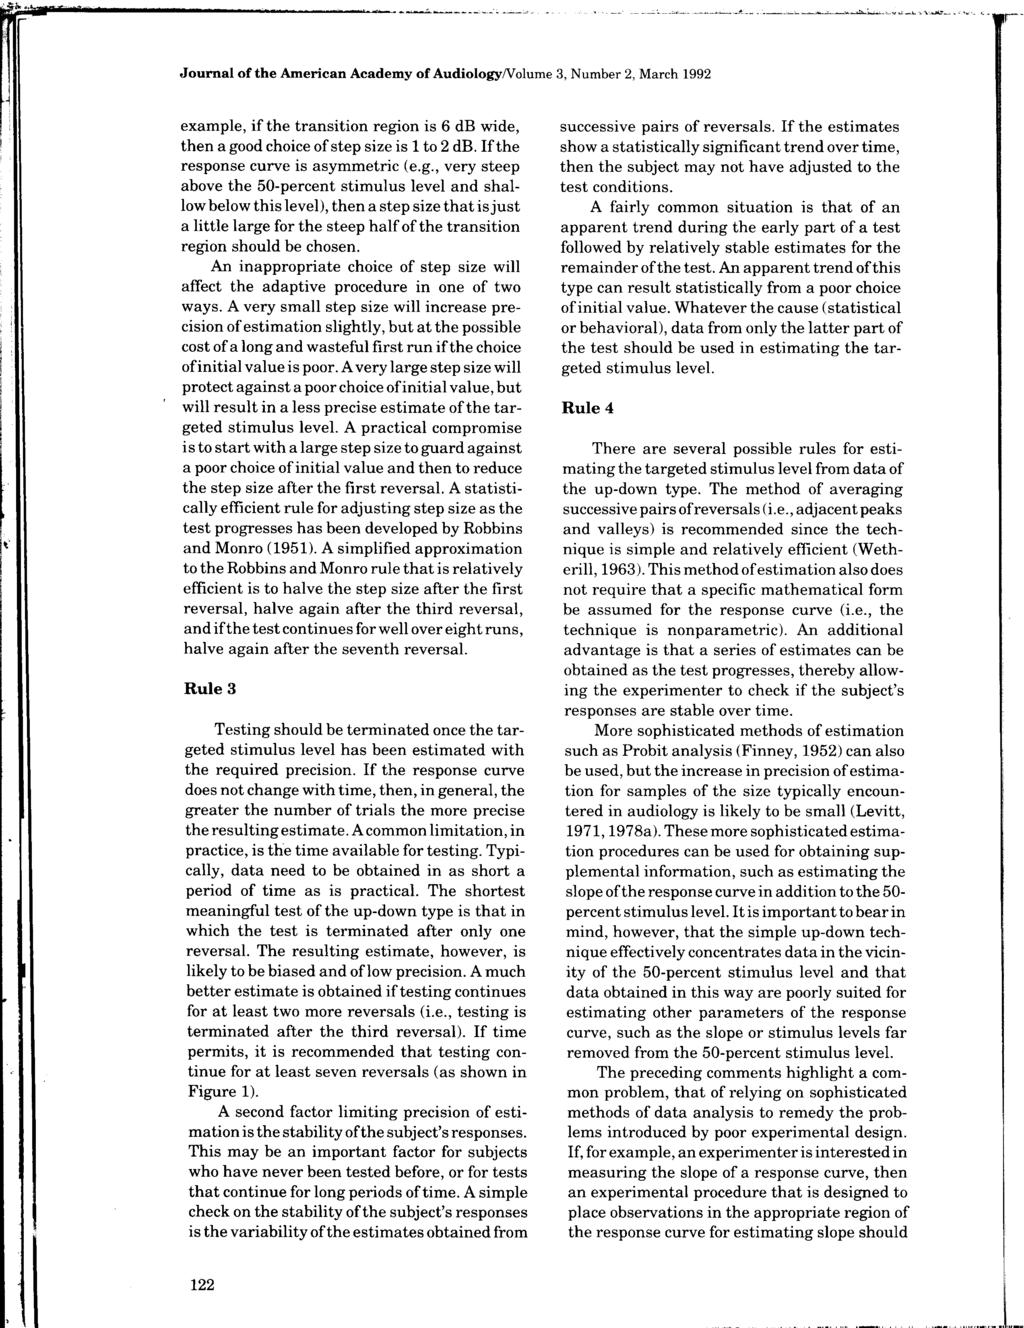 Journal of the American Academy of Audiology/Volume 3, Number 2, March 1992 example, if the transition region is 6 db wide, then a good choice of step size is 1 to 2 db.